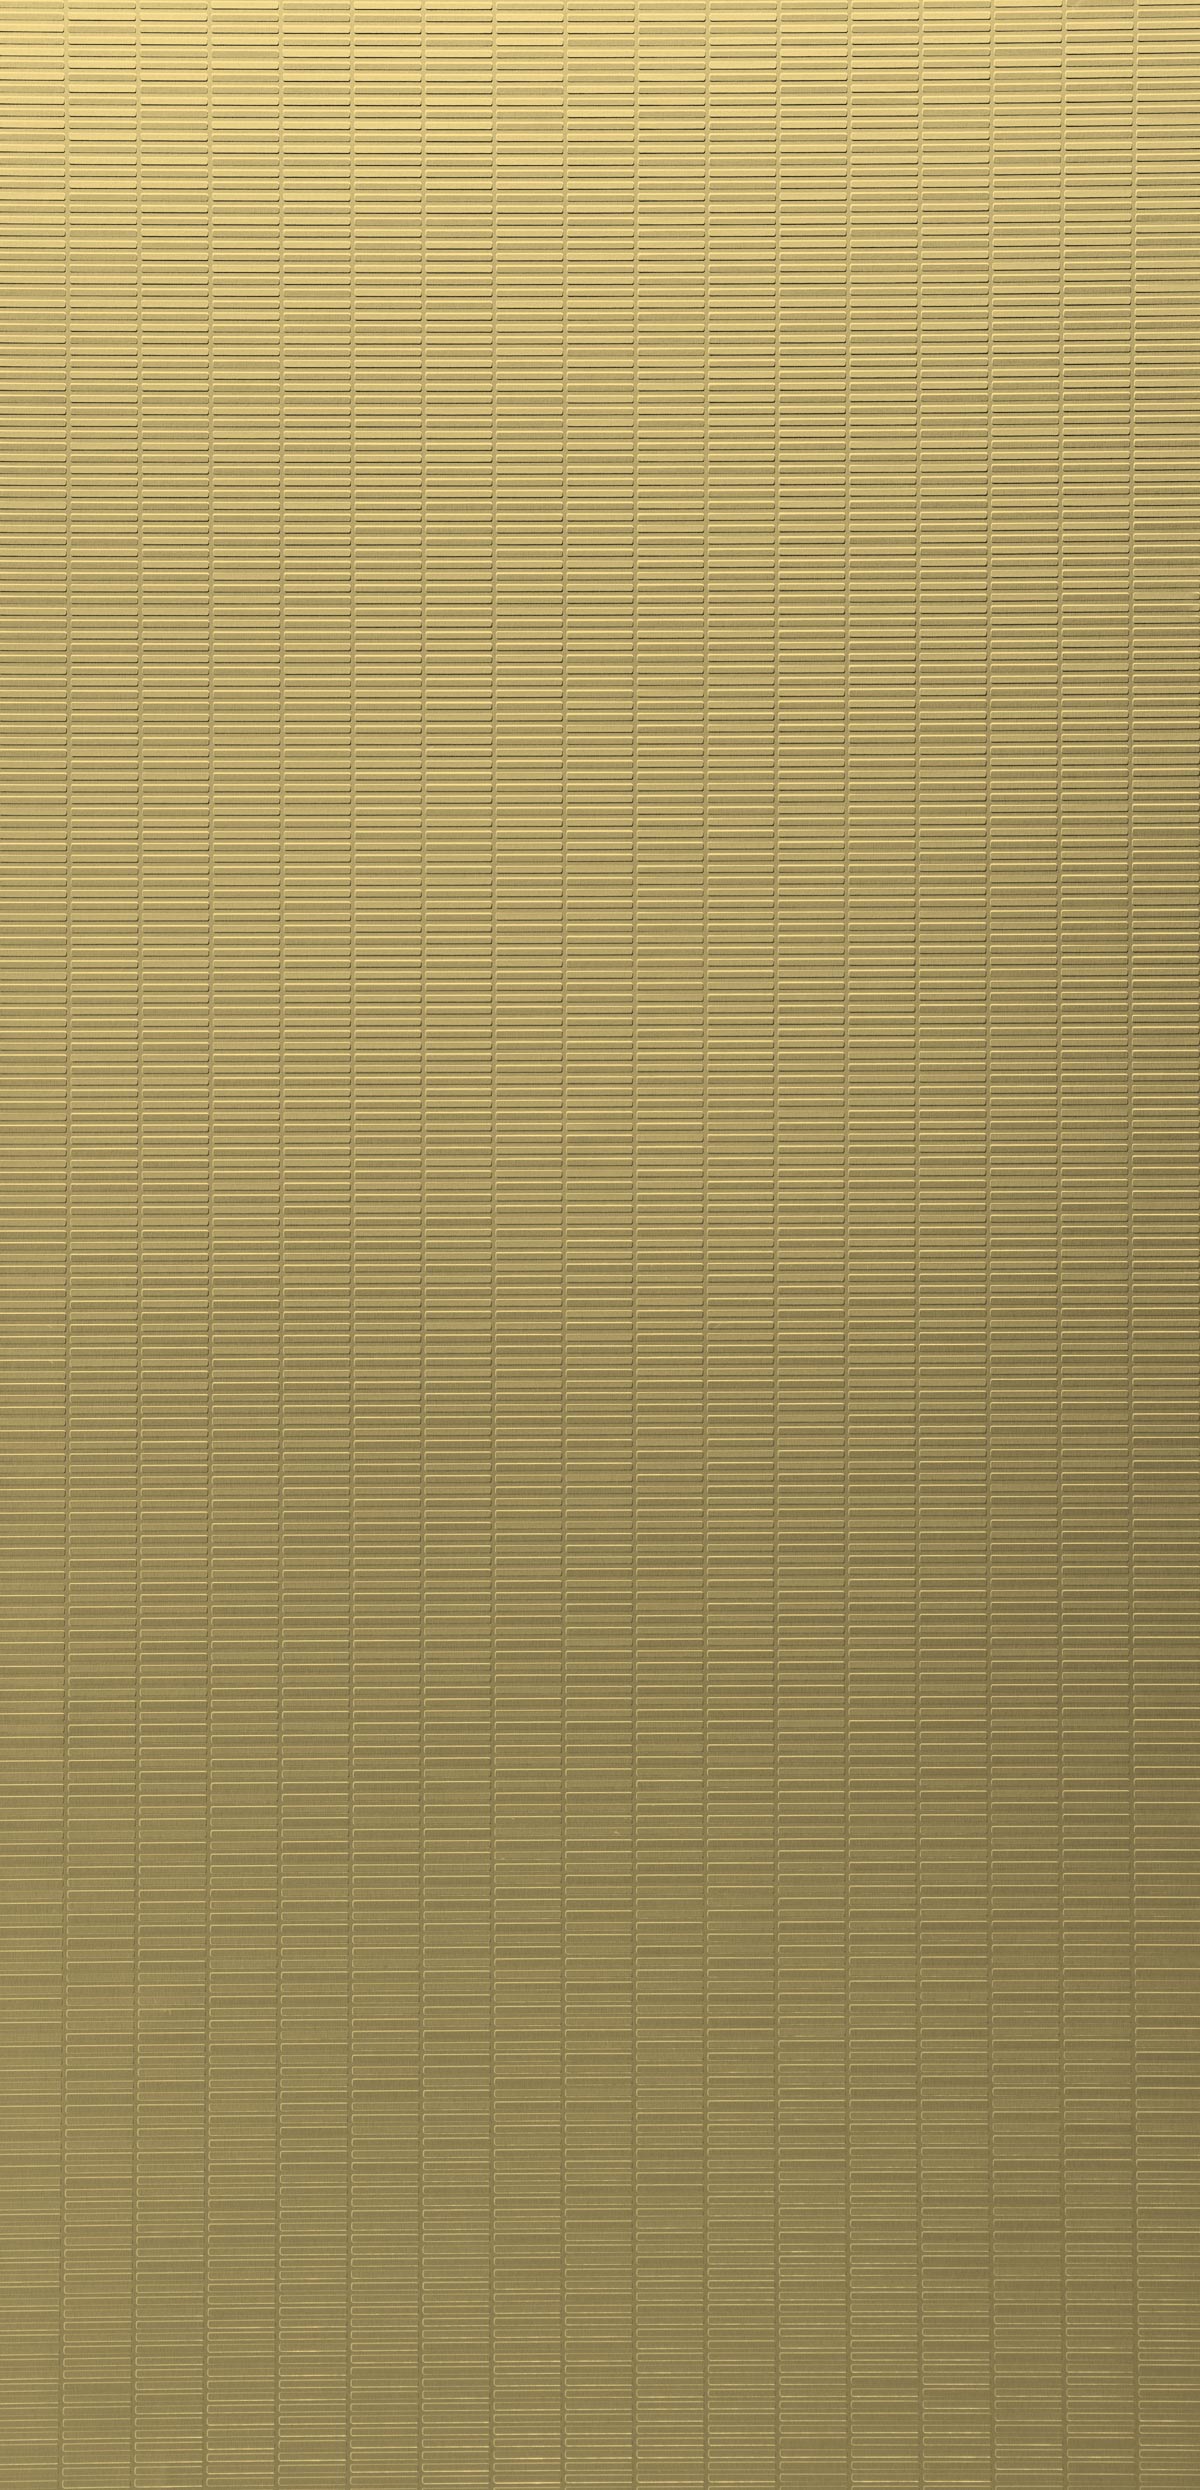 Brass brushed 4042-panel